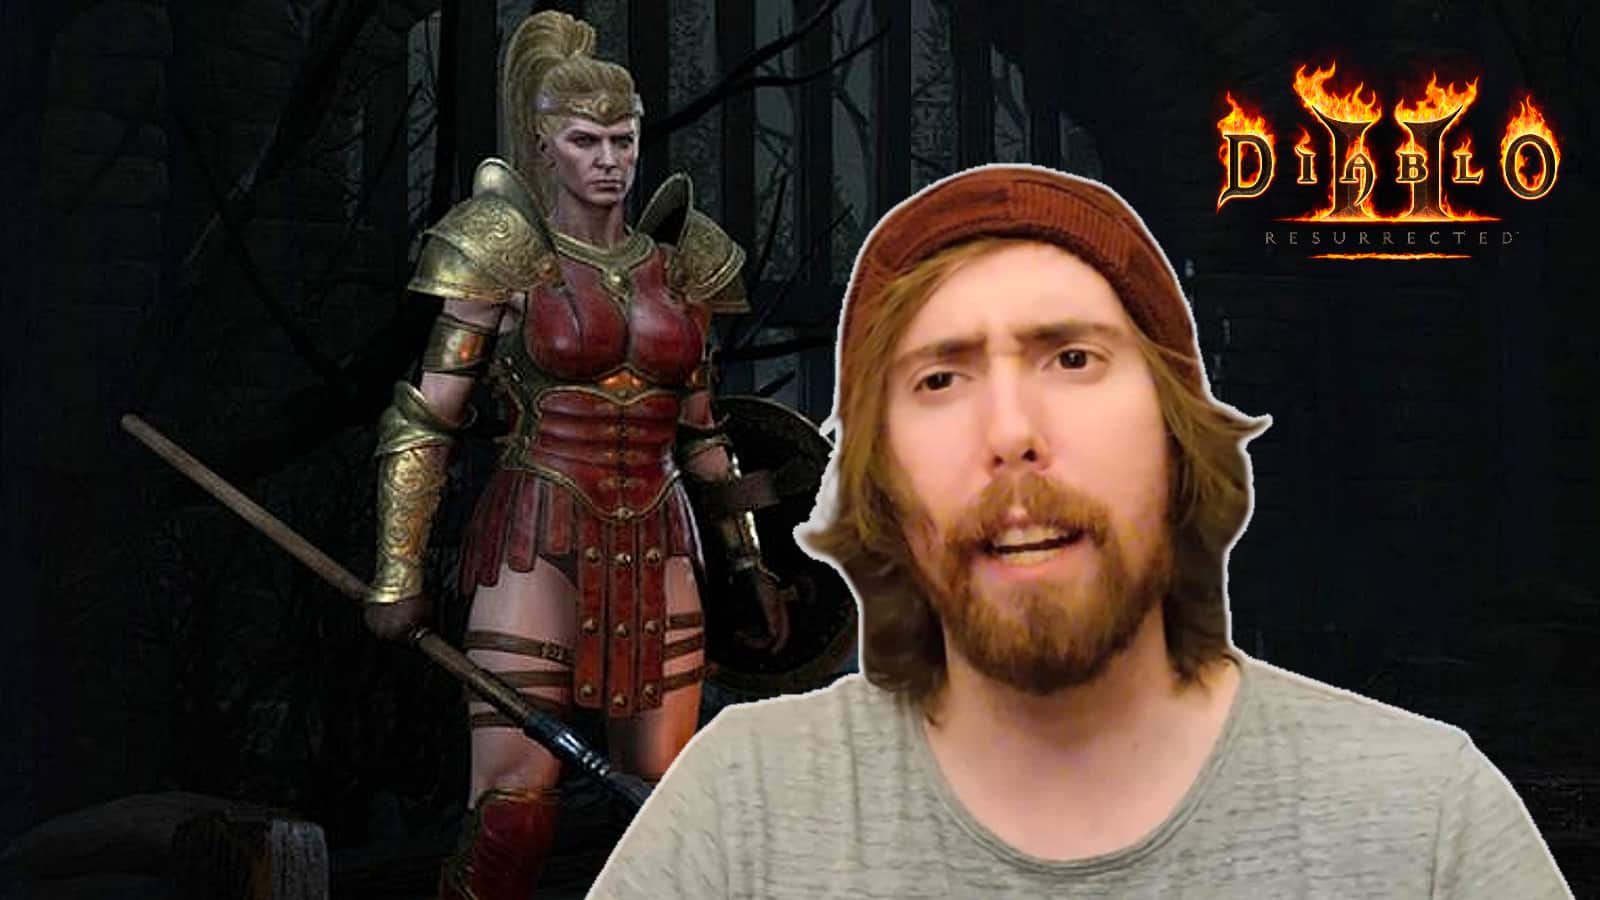 Asmongold with Diablo 2 Amazon in background